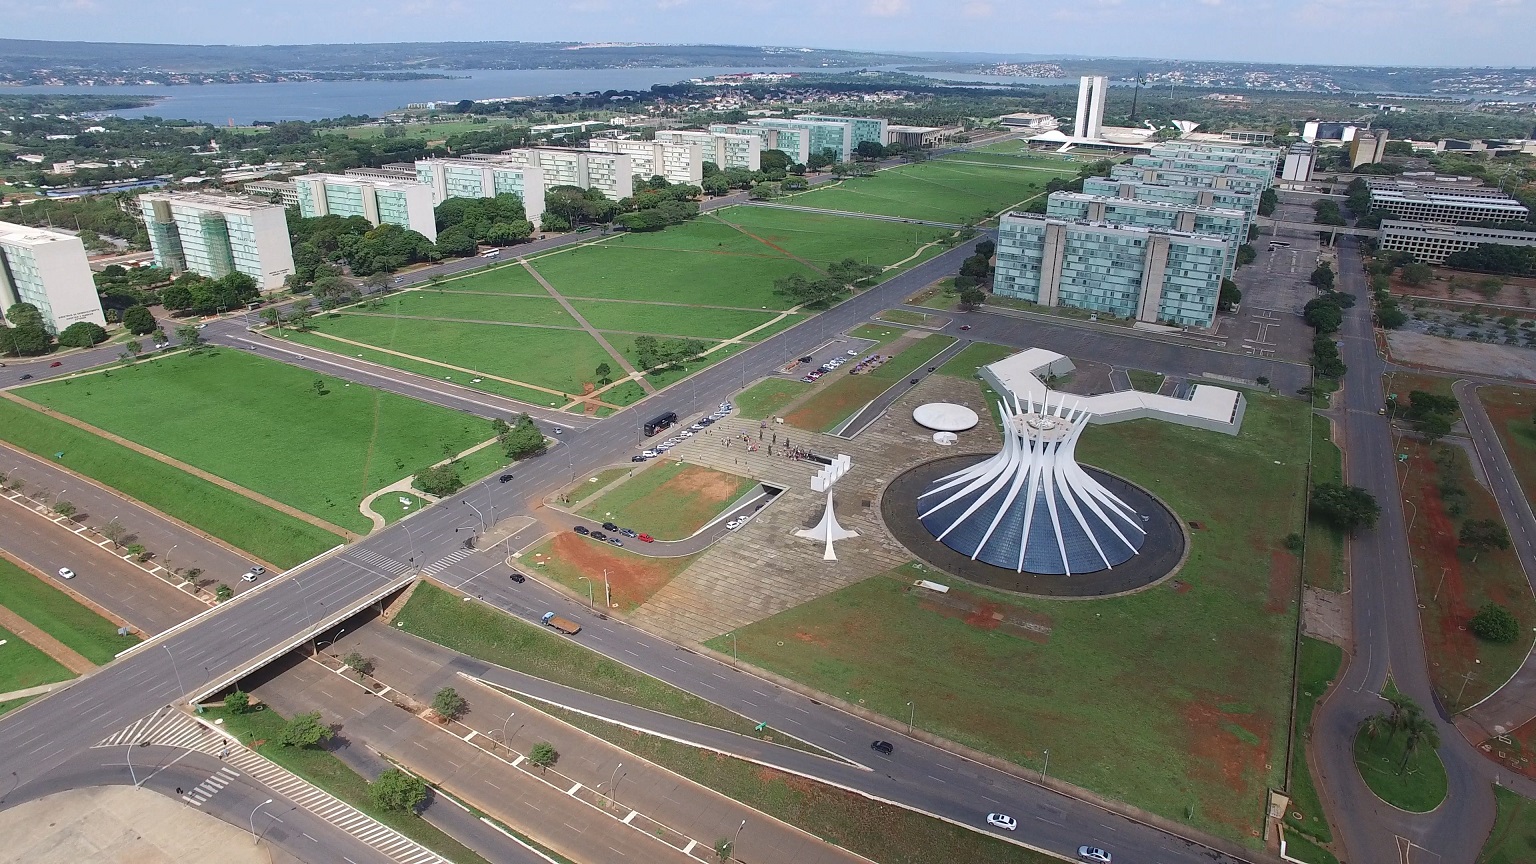 Brasilia was designed by architects Oscar Niemeyer and Lúcio Costa and was built in less than four years by more than 60,000 workers.